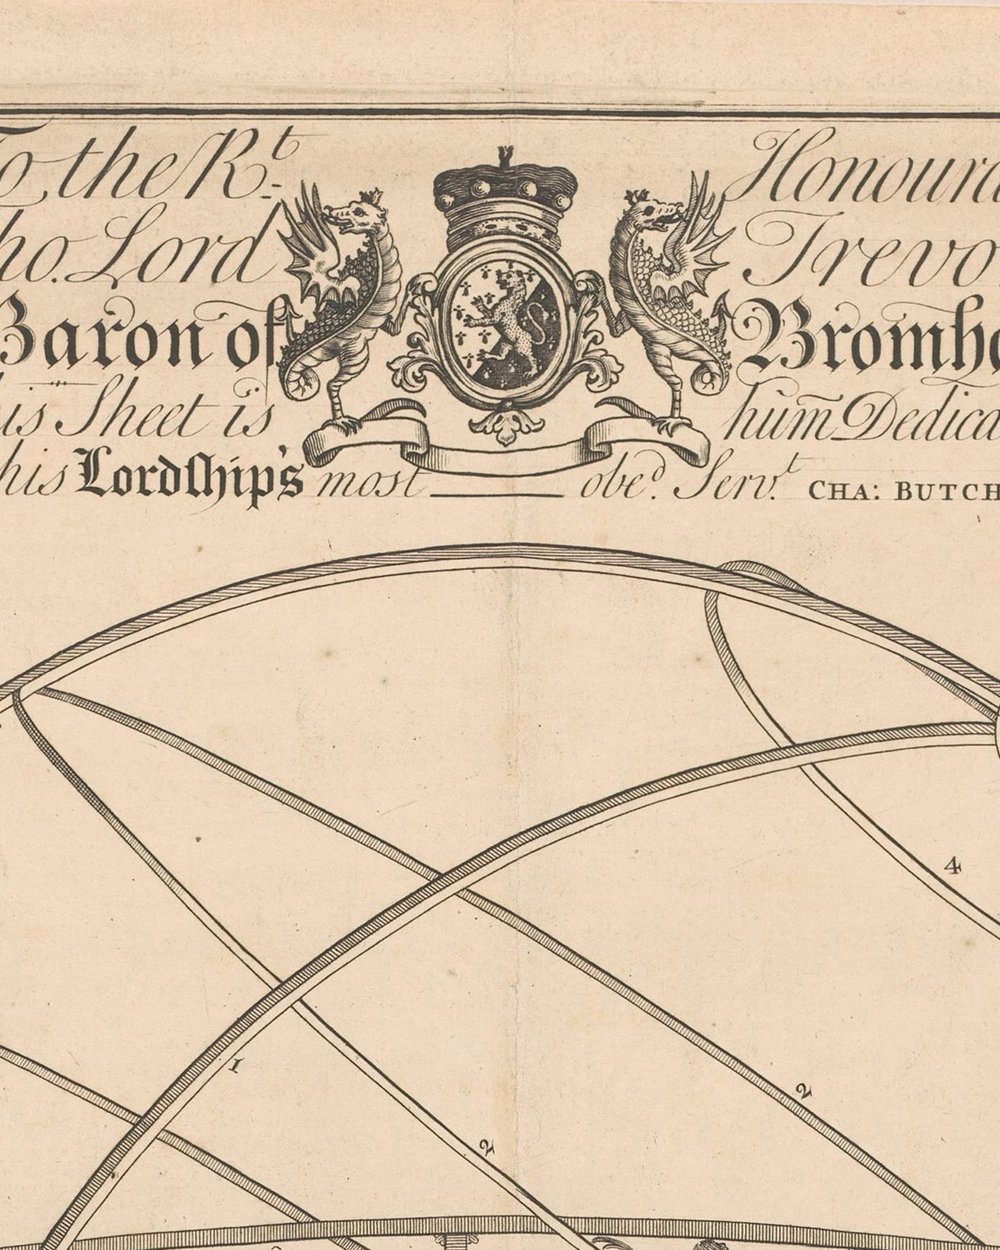 ''Mechanical model of the solar system explaining the principles of astronomy'' (1733)